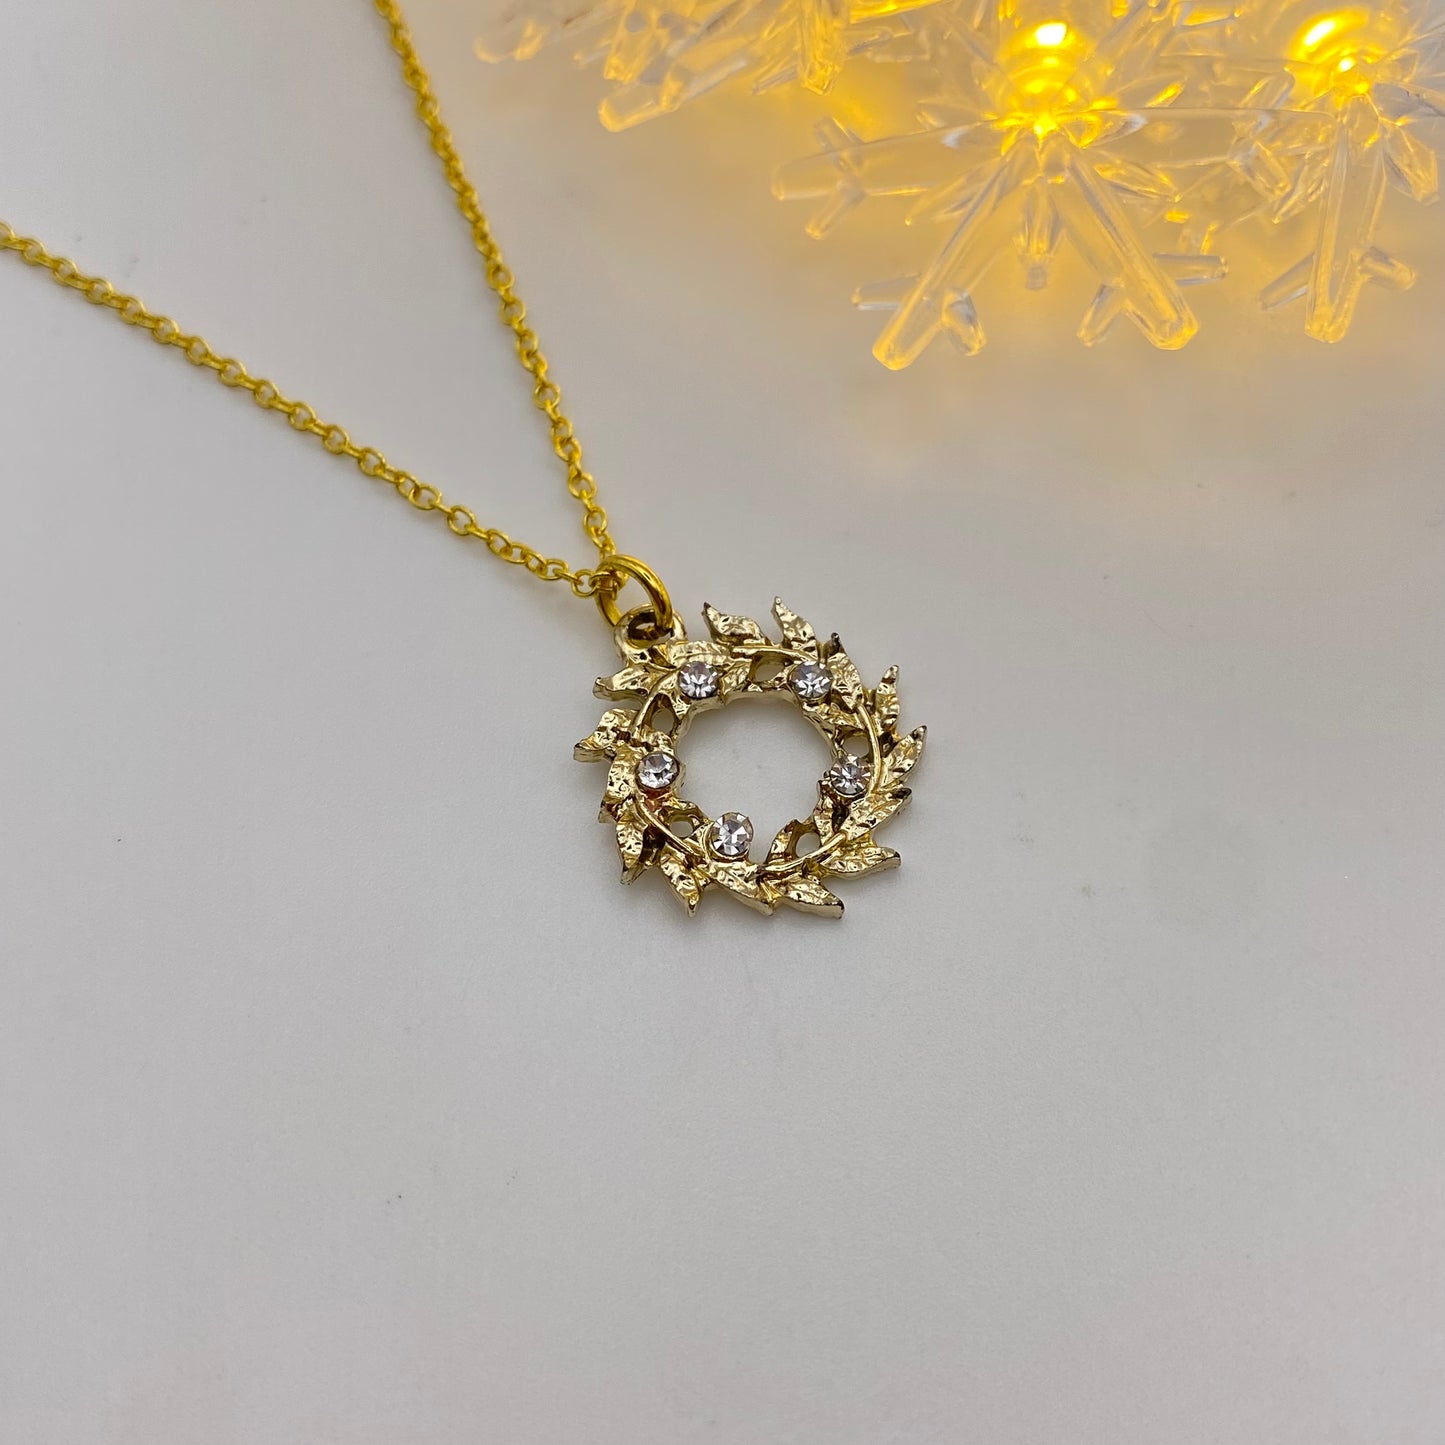 Gold Wreath Necklace